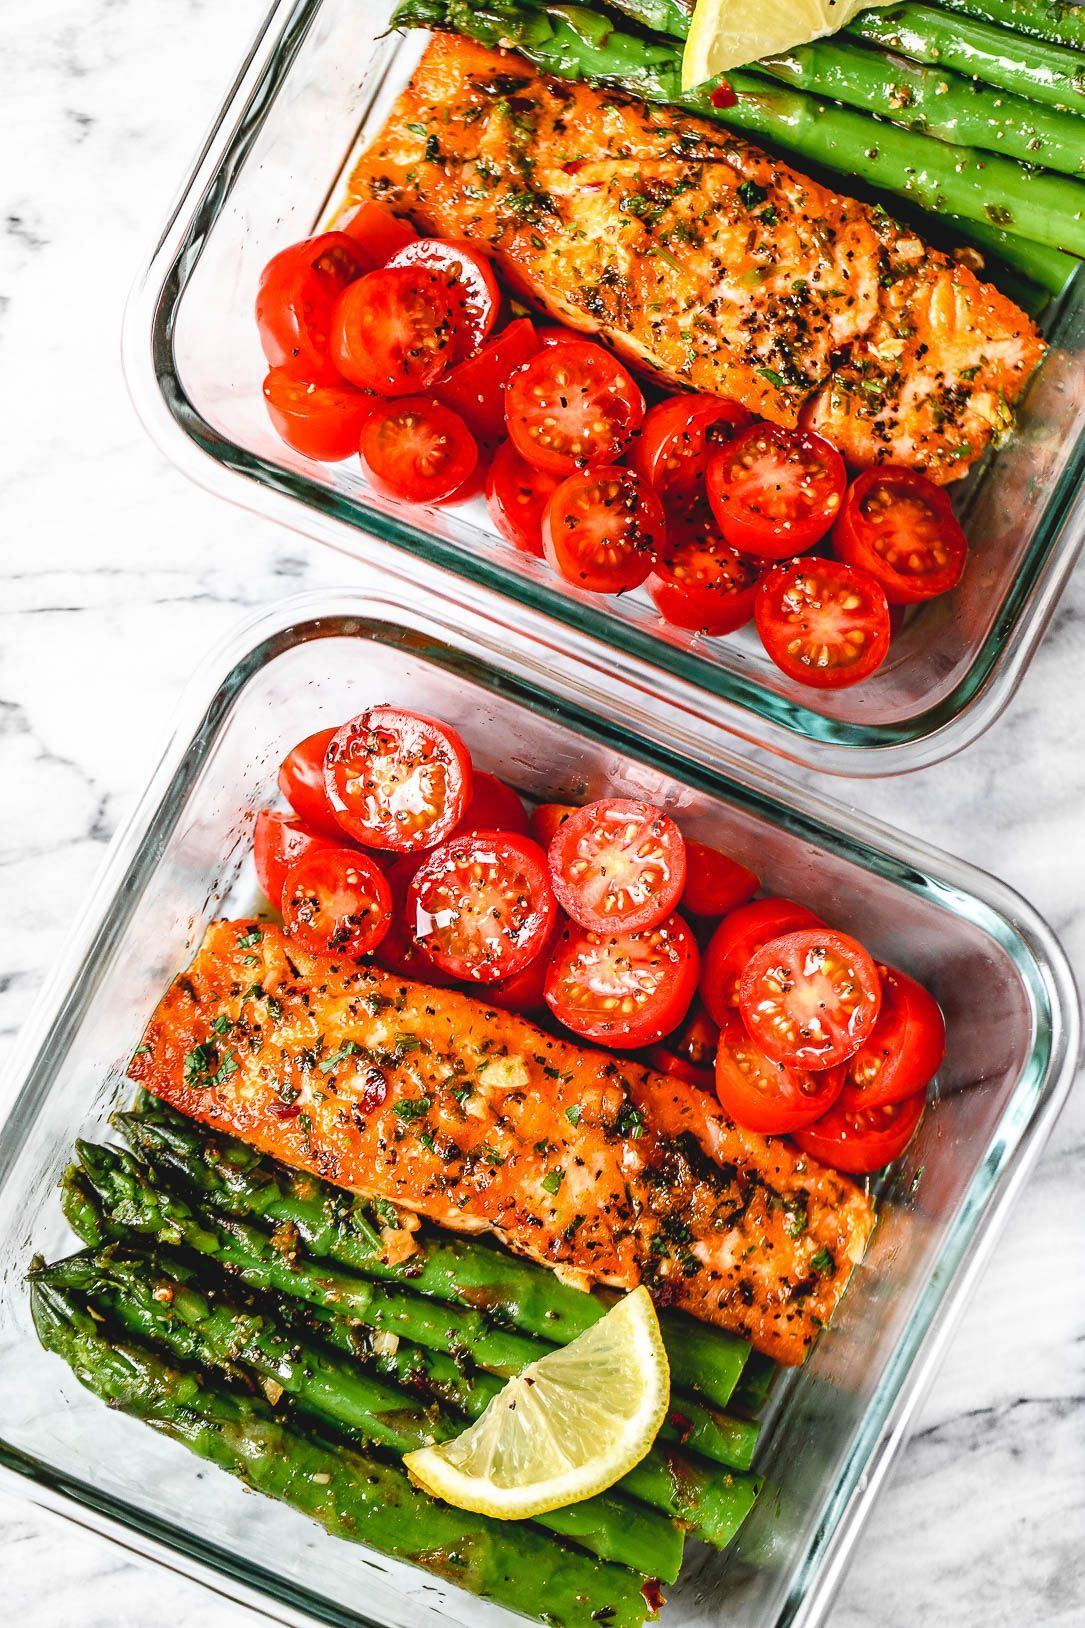 15-Minute Meal-Prep Salmon and Asparagus in Garlic Lemon Butter Sauce - 15-Minute Meal-Prep Salmon and Asparagus in Garlic Lemon Butter Sauce -   16 fitness Meals healthy ideas